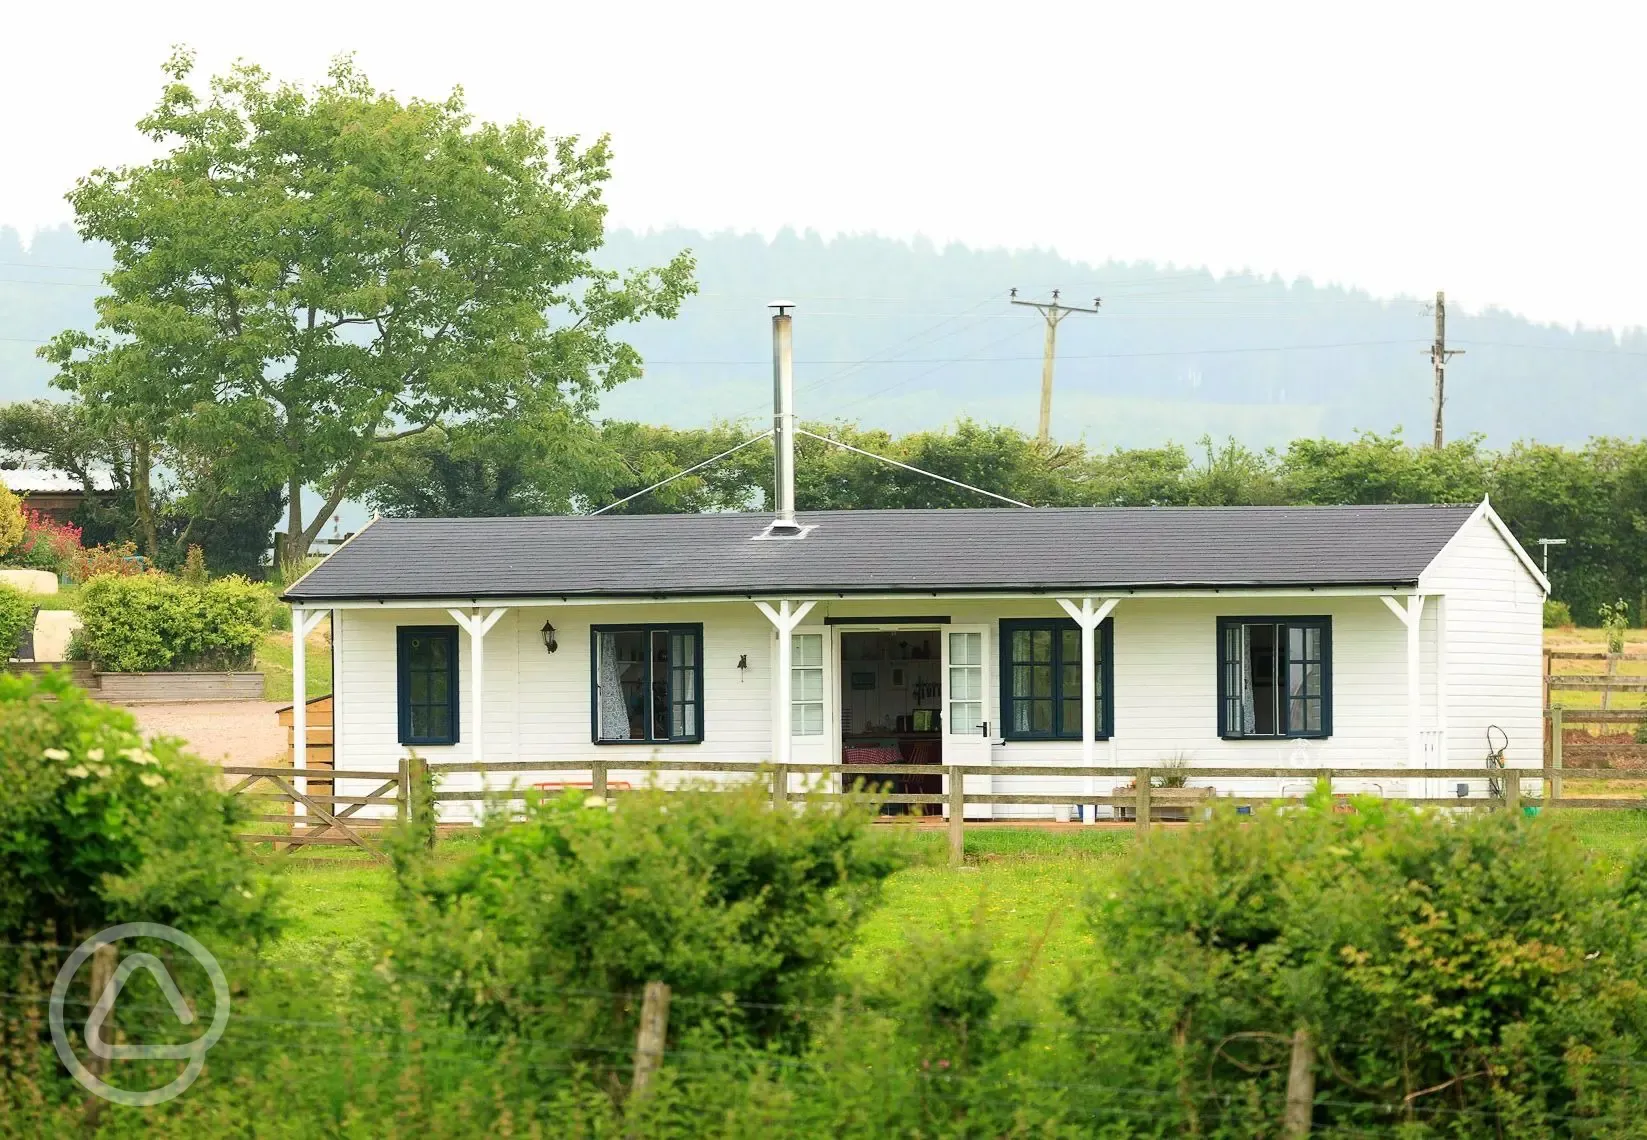 The Deckhouse Cabin at Middle Stone Farm